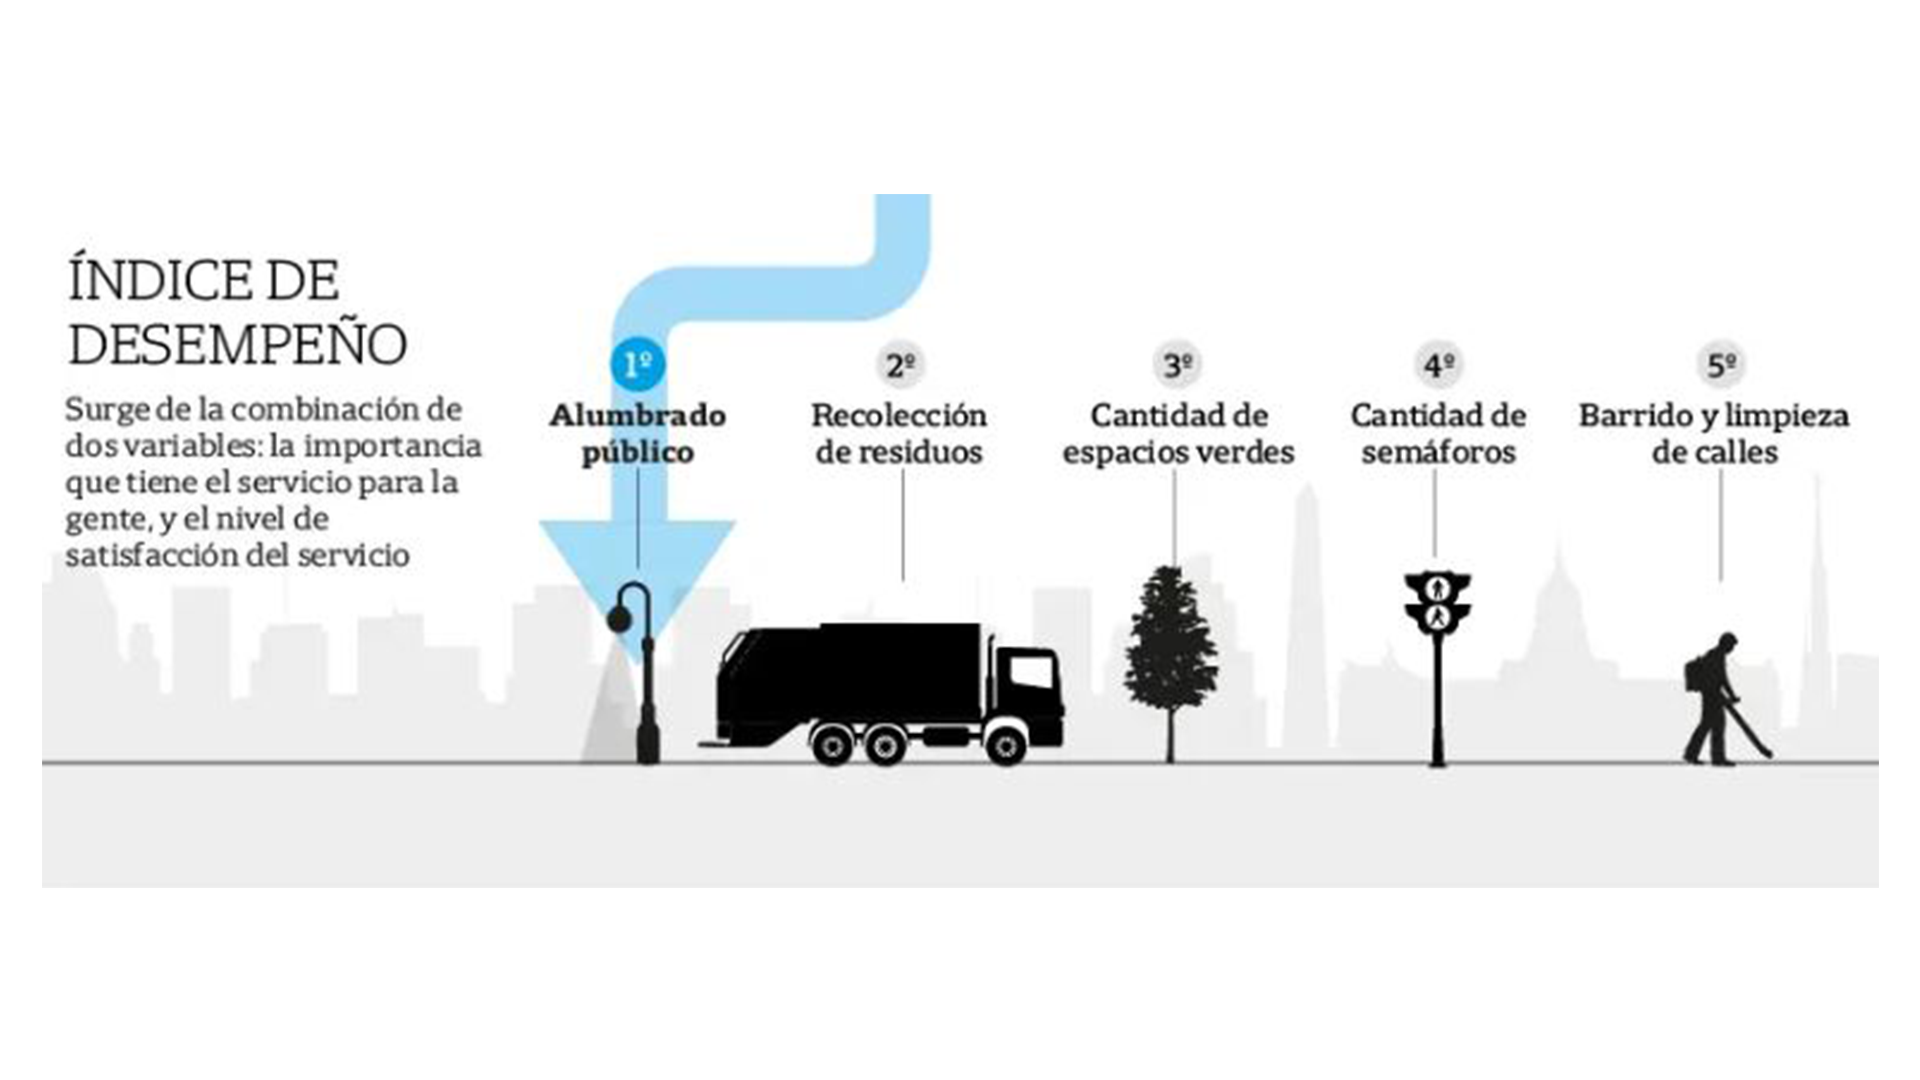 80% of the residents of Buenos Aires claim that the public service with the best performance is Street Lighting